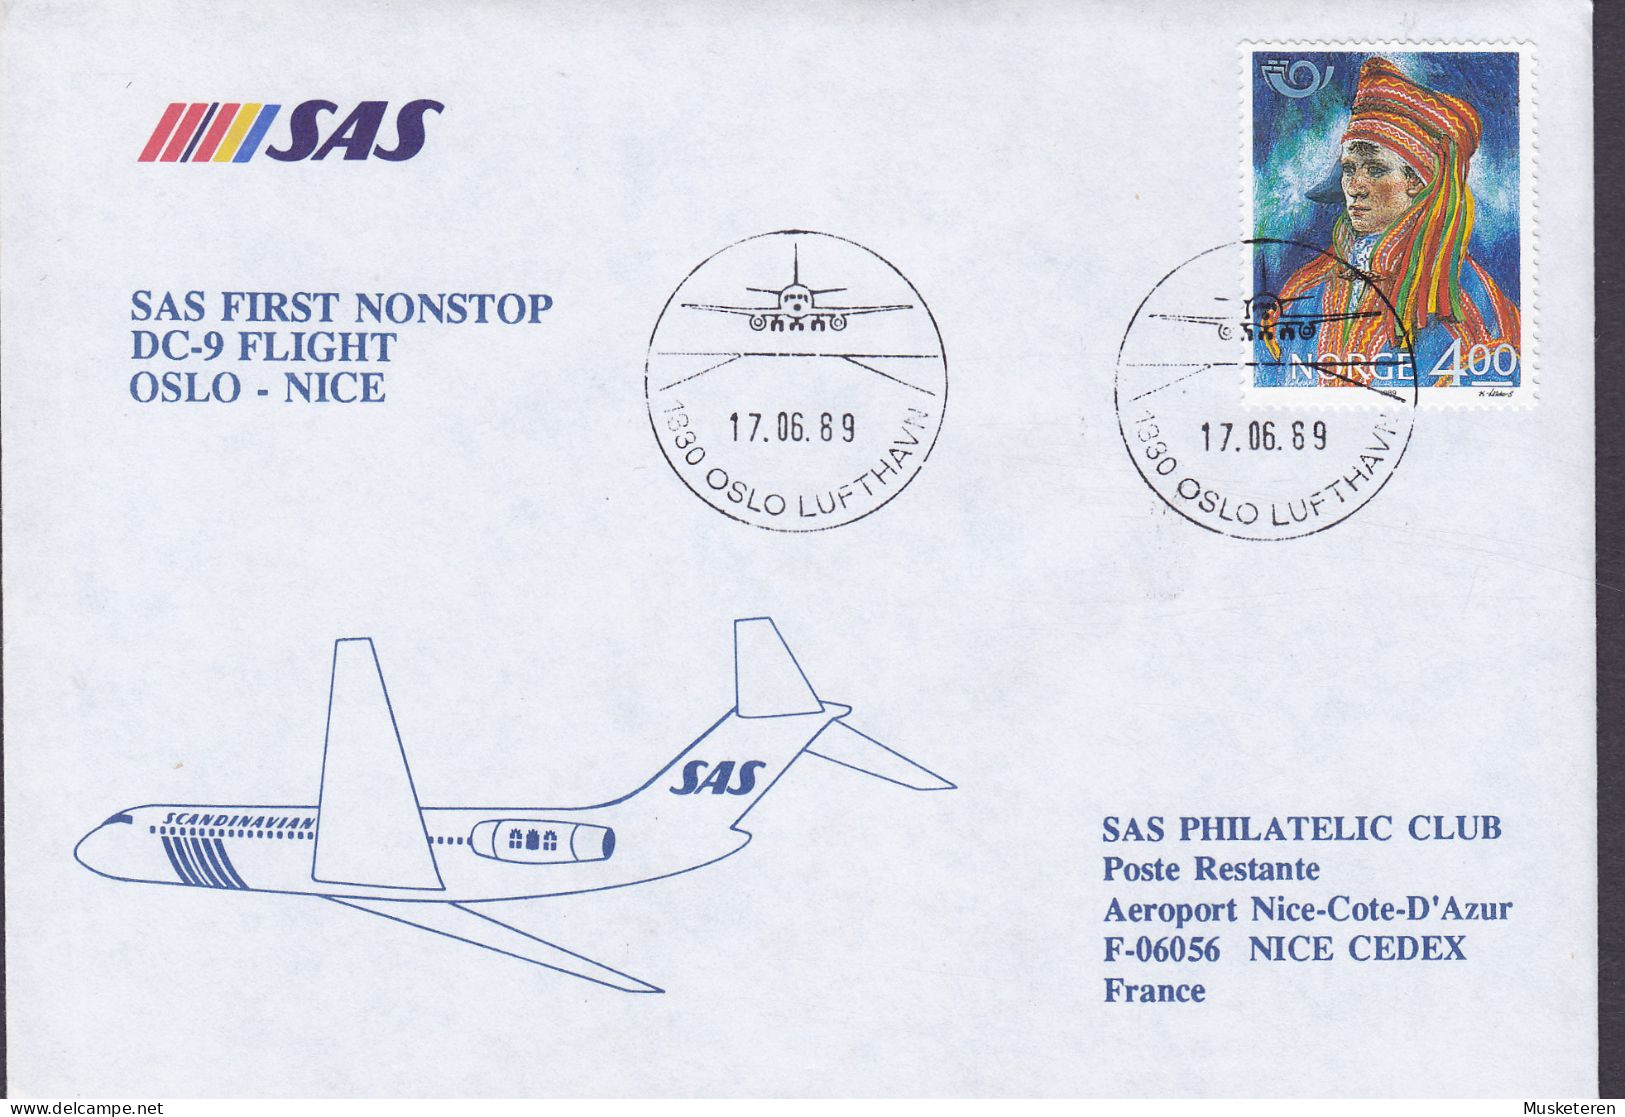 Norway SAS First Nonstop DC-9 Flight OSLO-NICE 1989 Cover Brief Lettre NORDEN Nordia Nordic Joint Issue Stamp - Covers & Documents